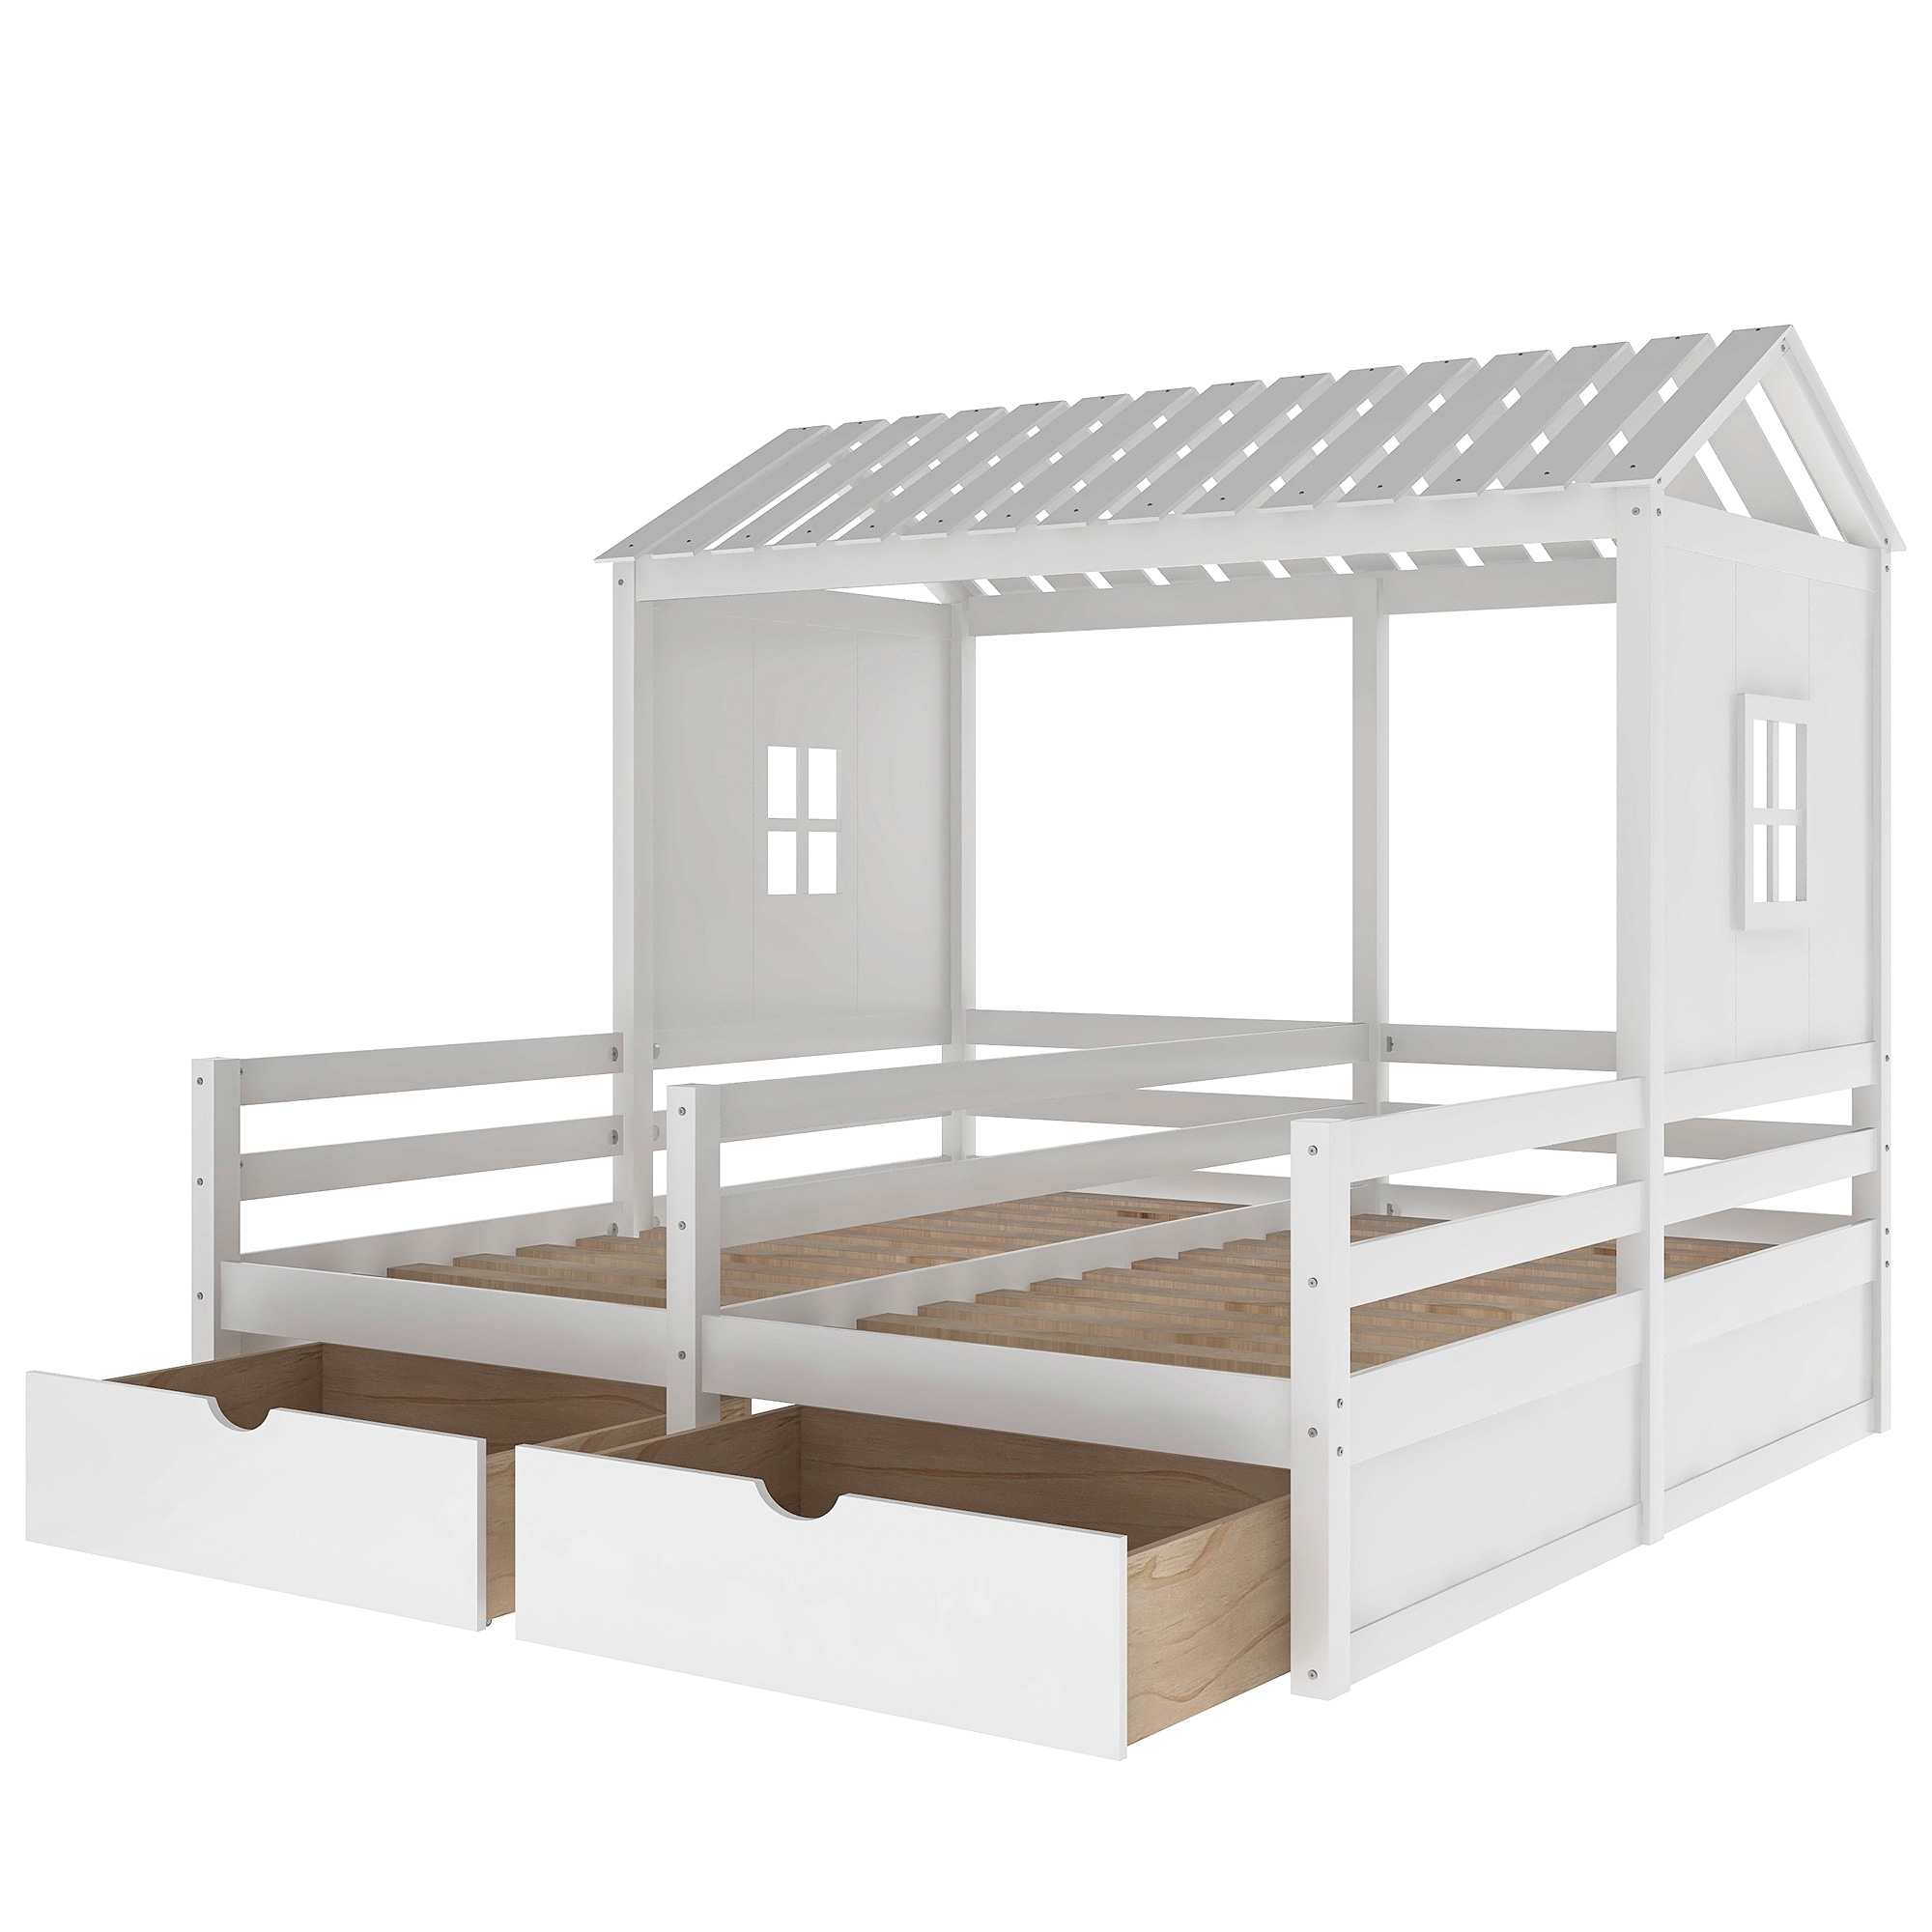 Twin Size House Platform Beds with Two Drawers, 2 Side by Side Kid Beds,Gray/White - White